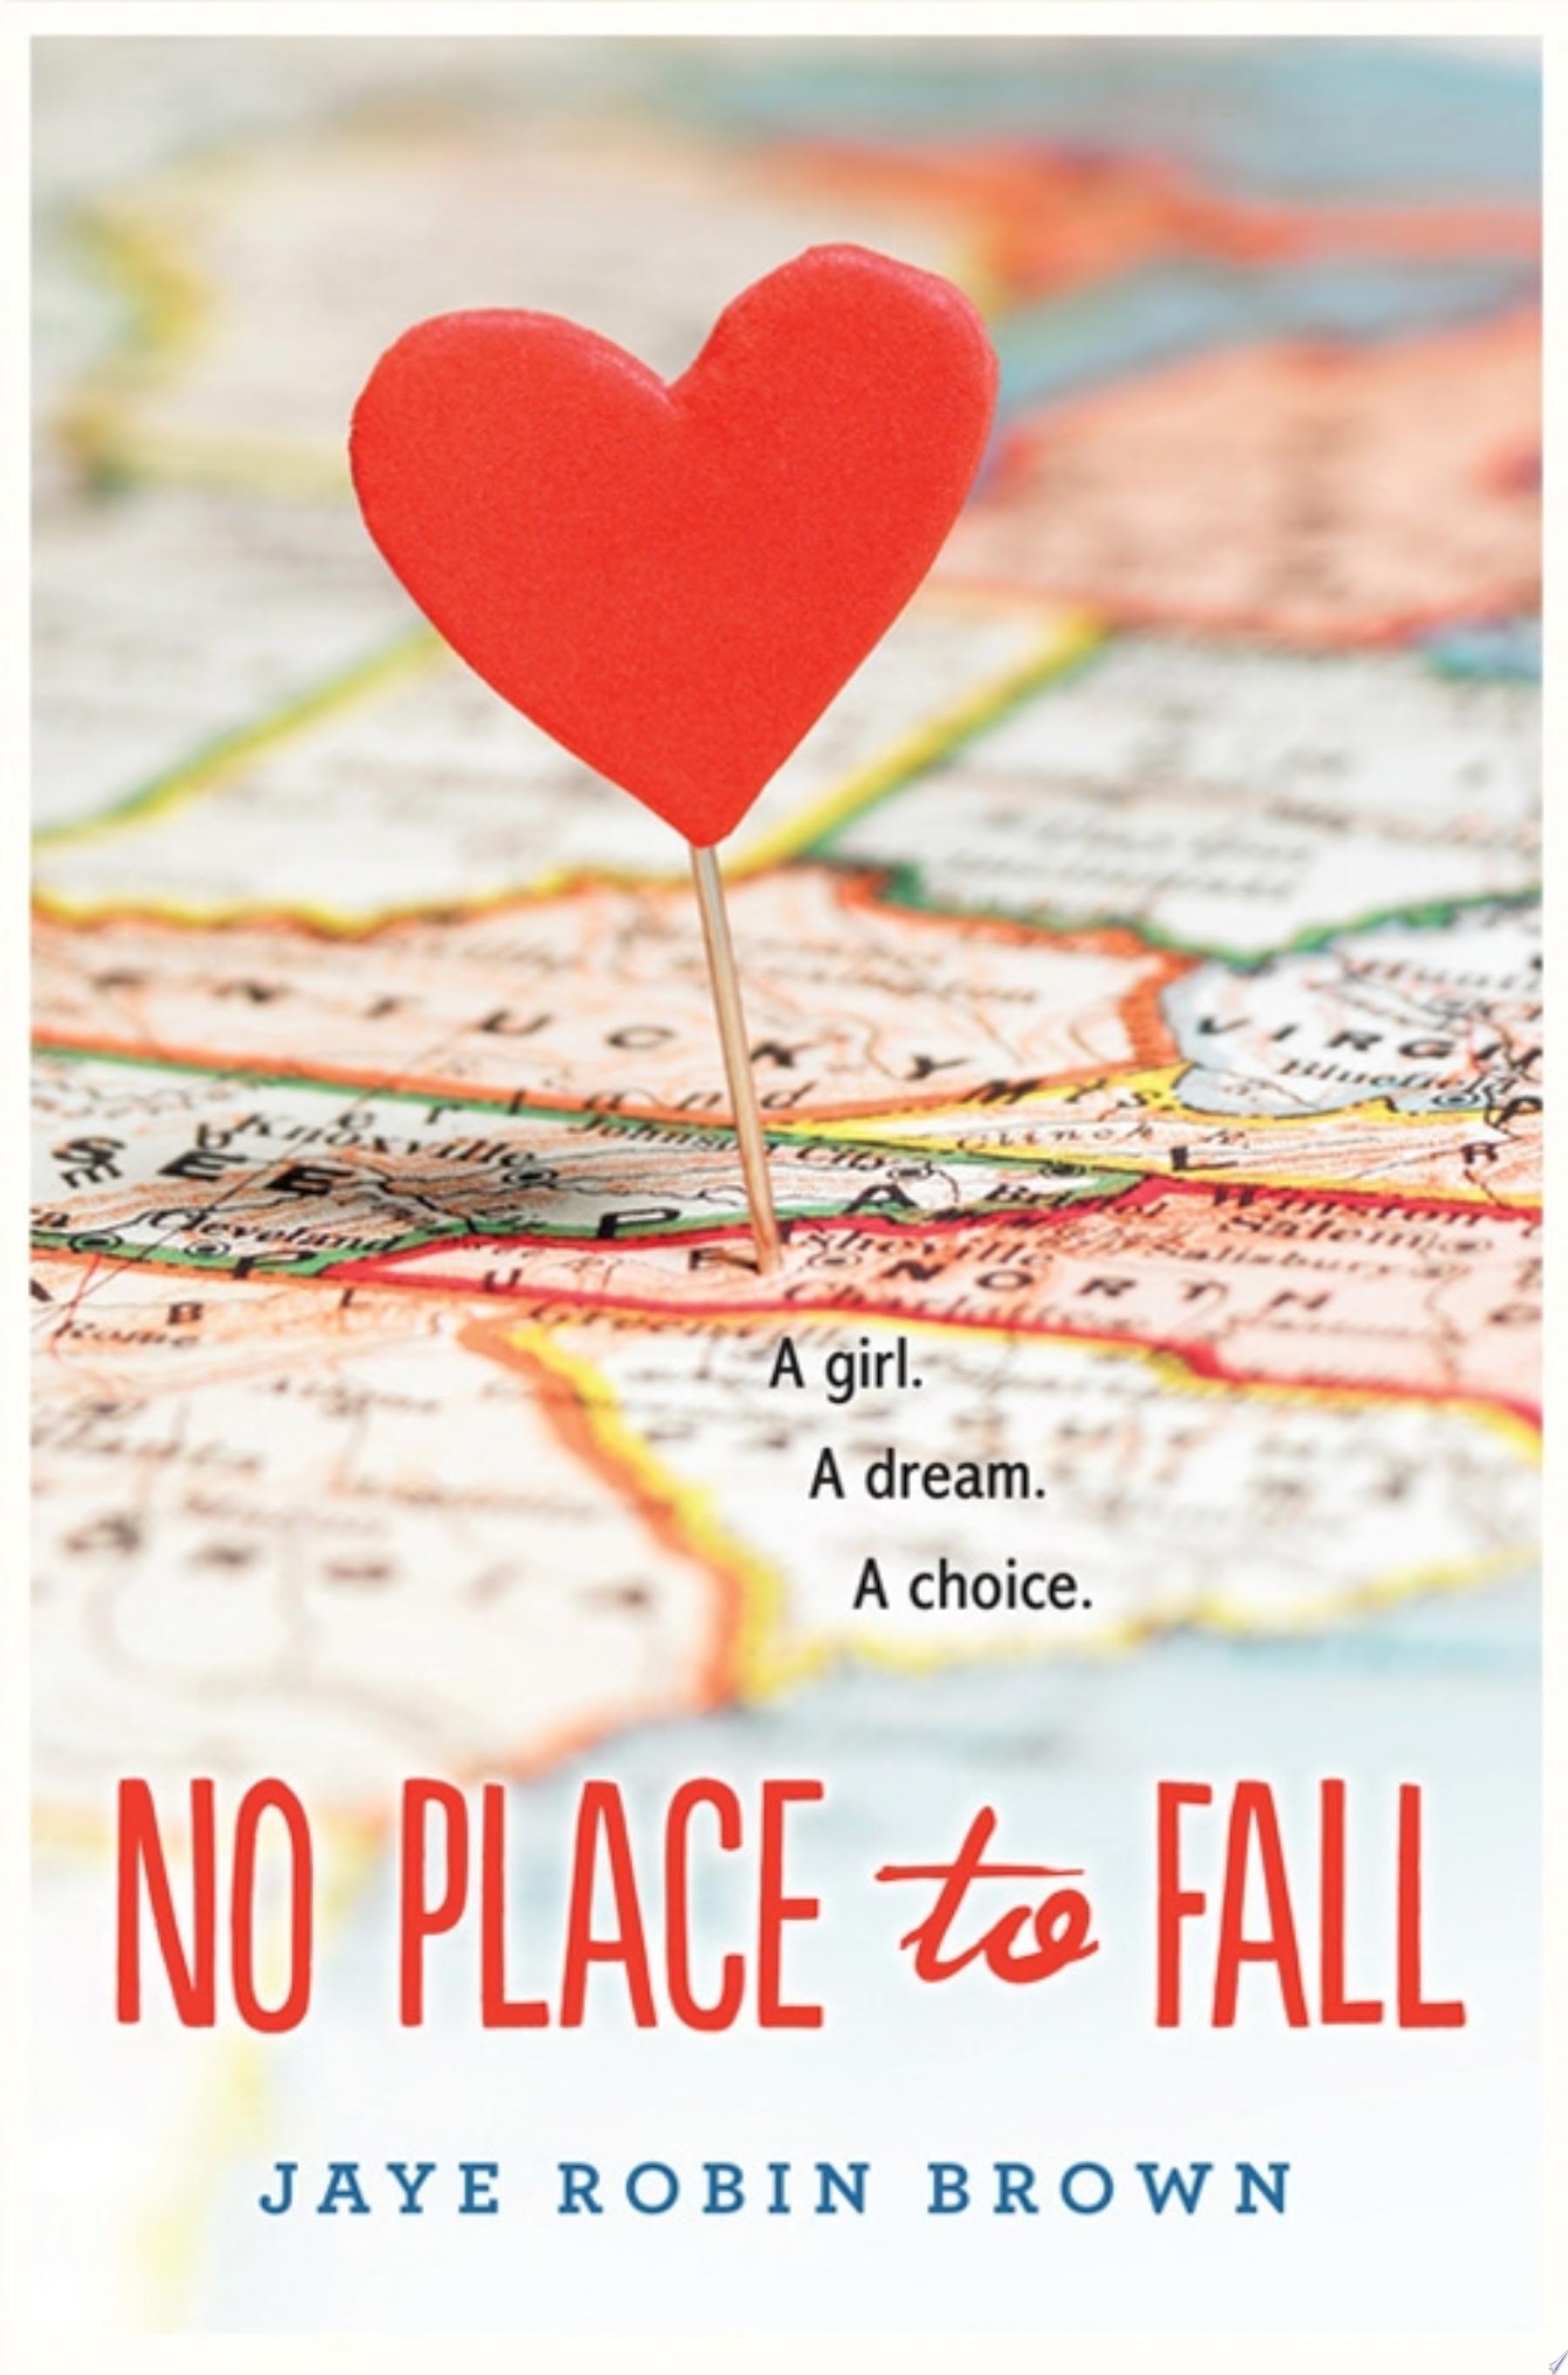 Image for "No Place to Fall"